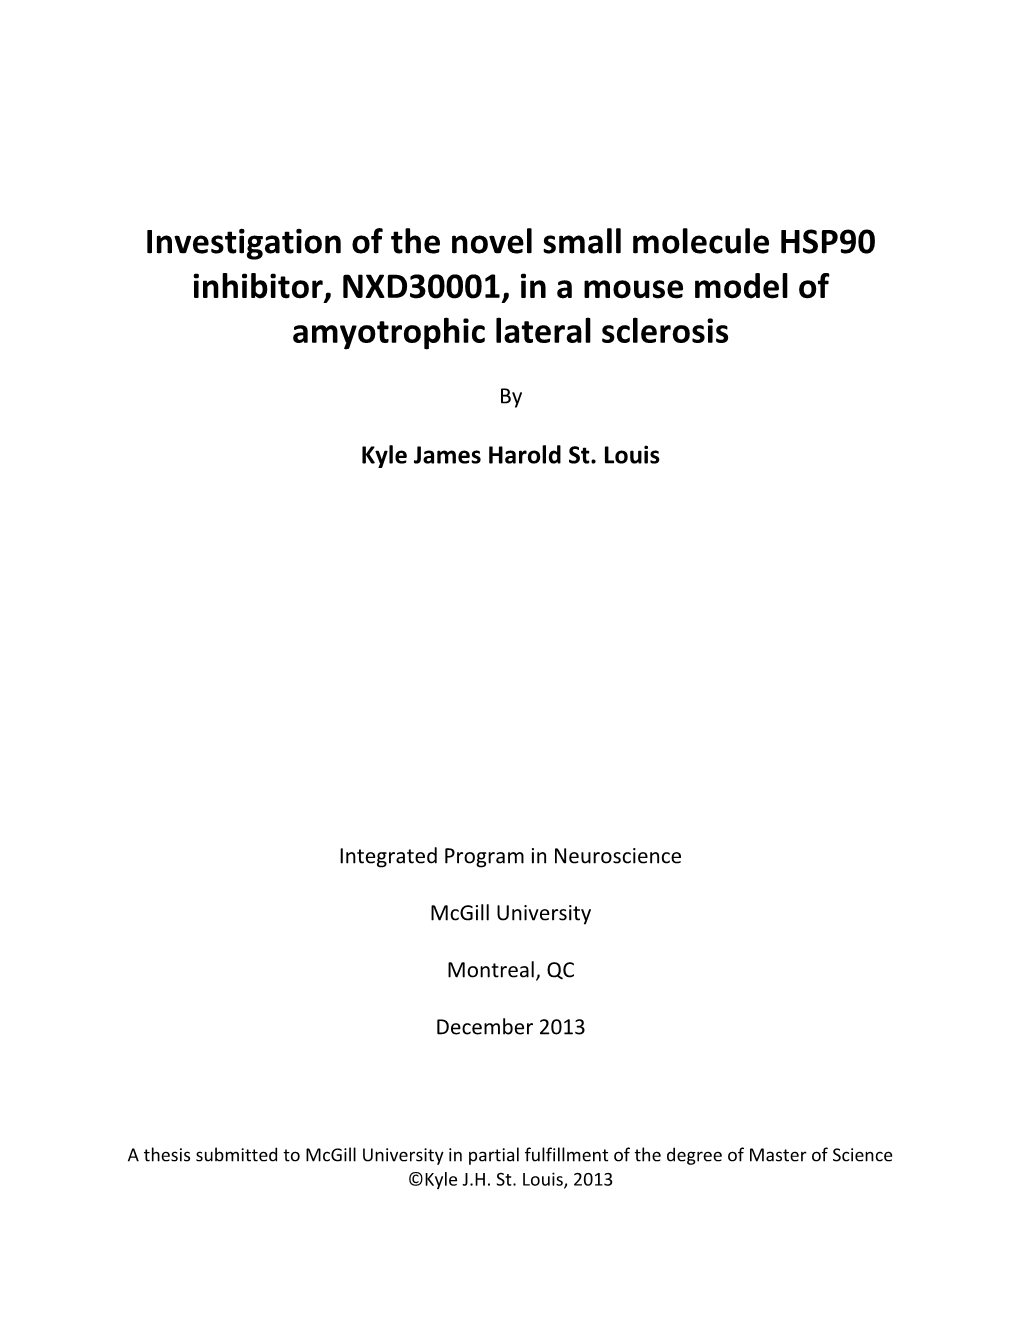 Investigation of the Novel Small Molecule HSP90 Inhibitor, NXD30001, in a Mouse Model of Amyotrophic Lateral Sclerosis